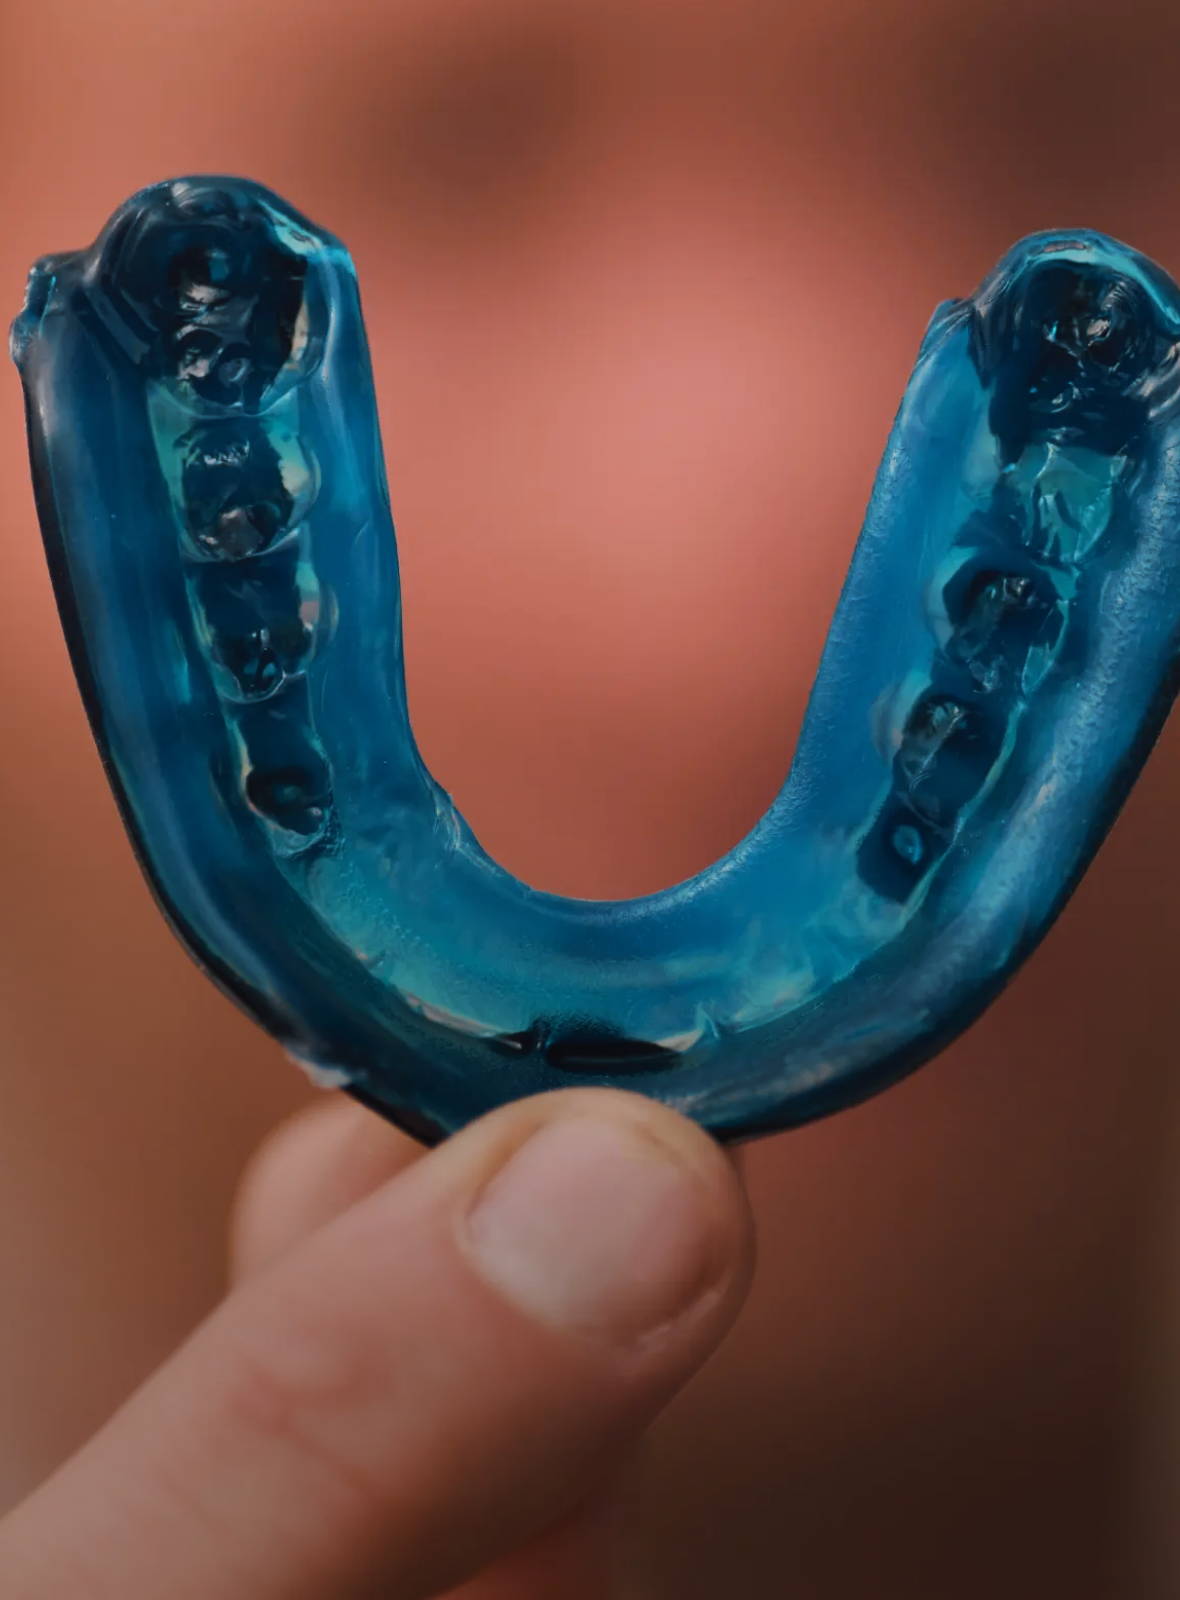 MOUTHGUARD FIT GUIDE - FIND THE RIGHT MOUTHGUARD